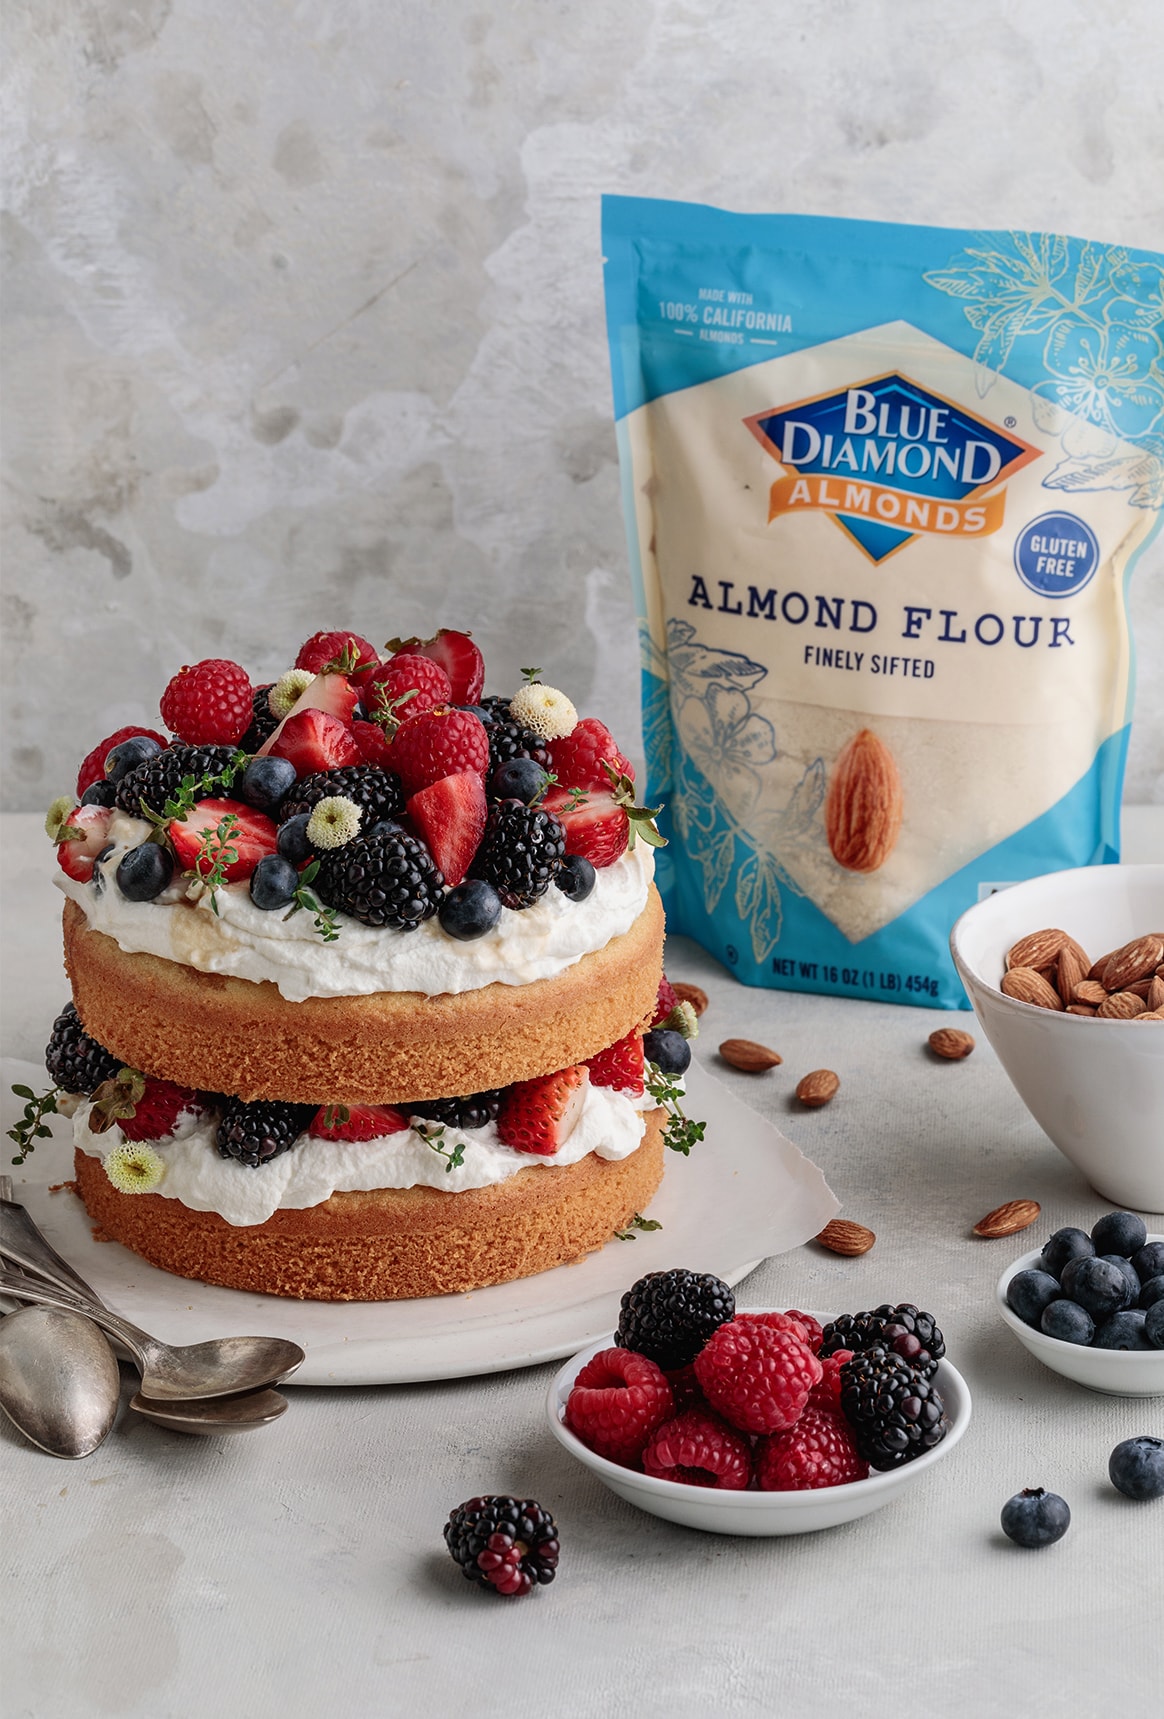 Delicious and easy to make Gluten-free Berries and Almond Cake made with almond flour and topped with maple whipped cream and seasonal berries.